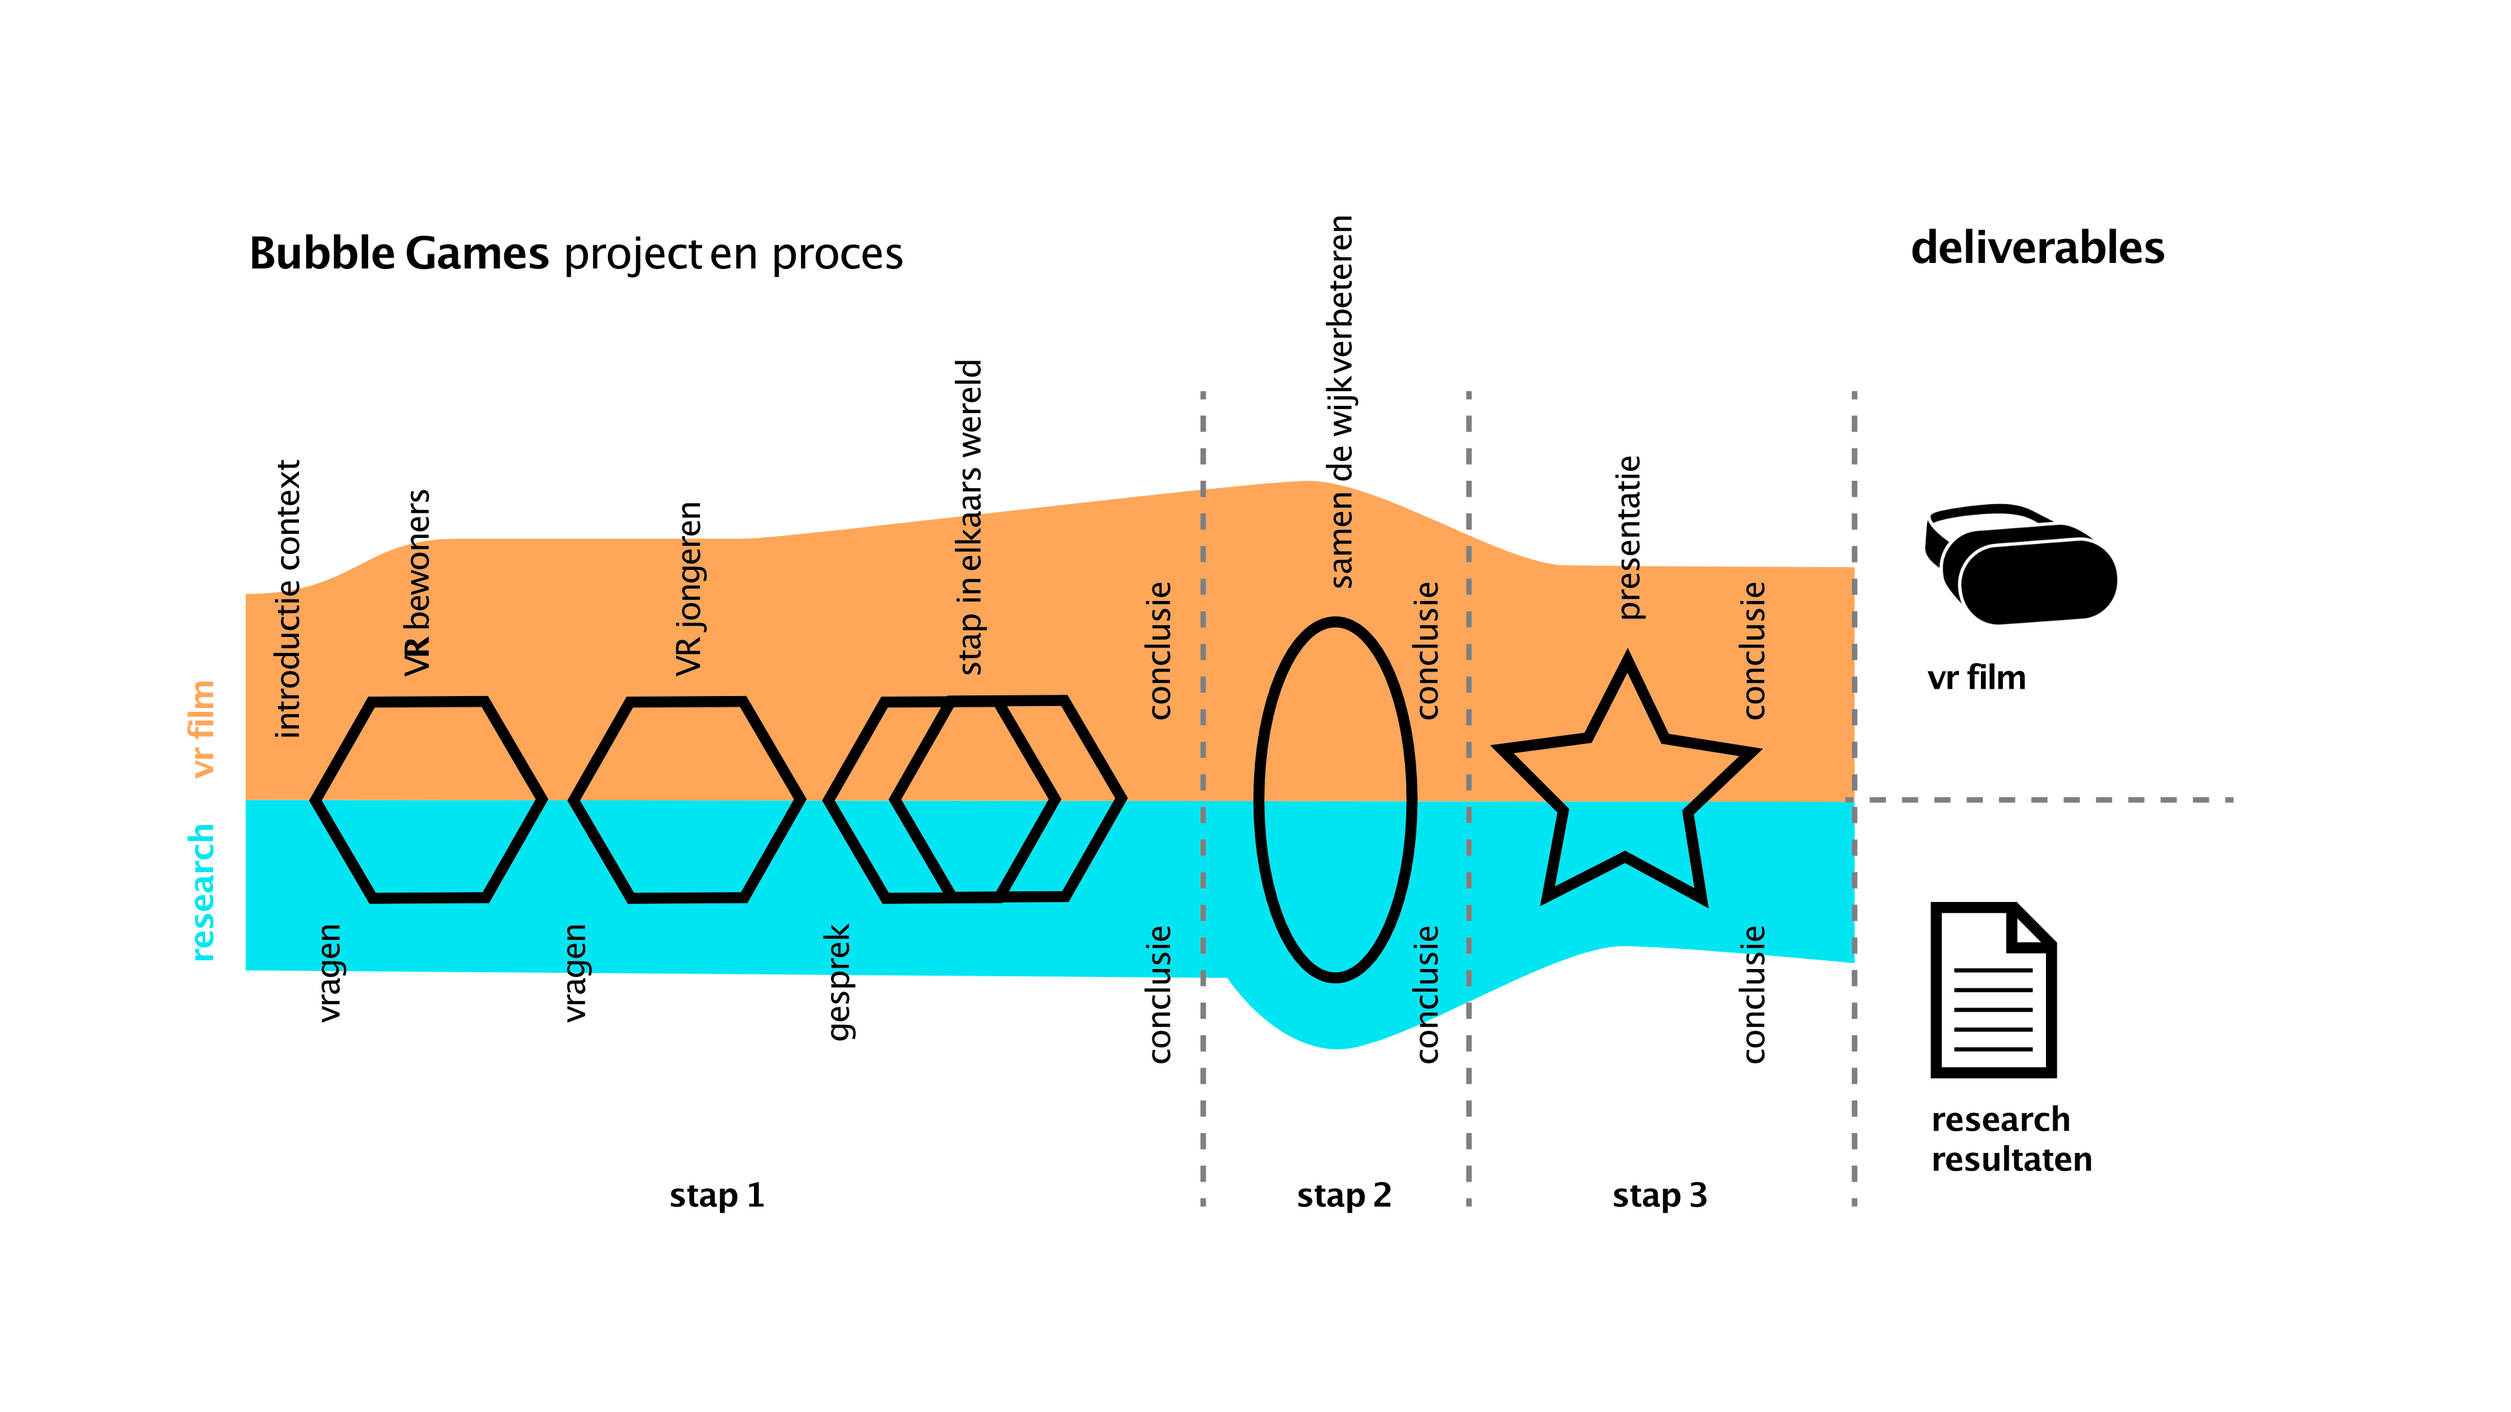 Visual representation of the project's process